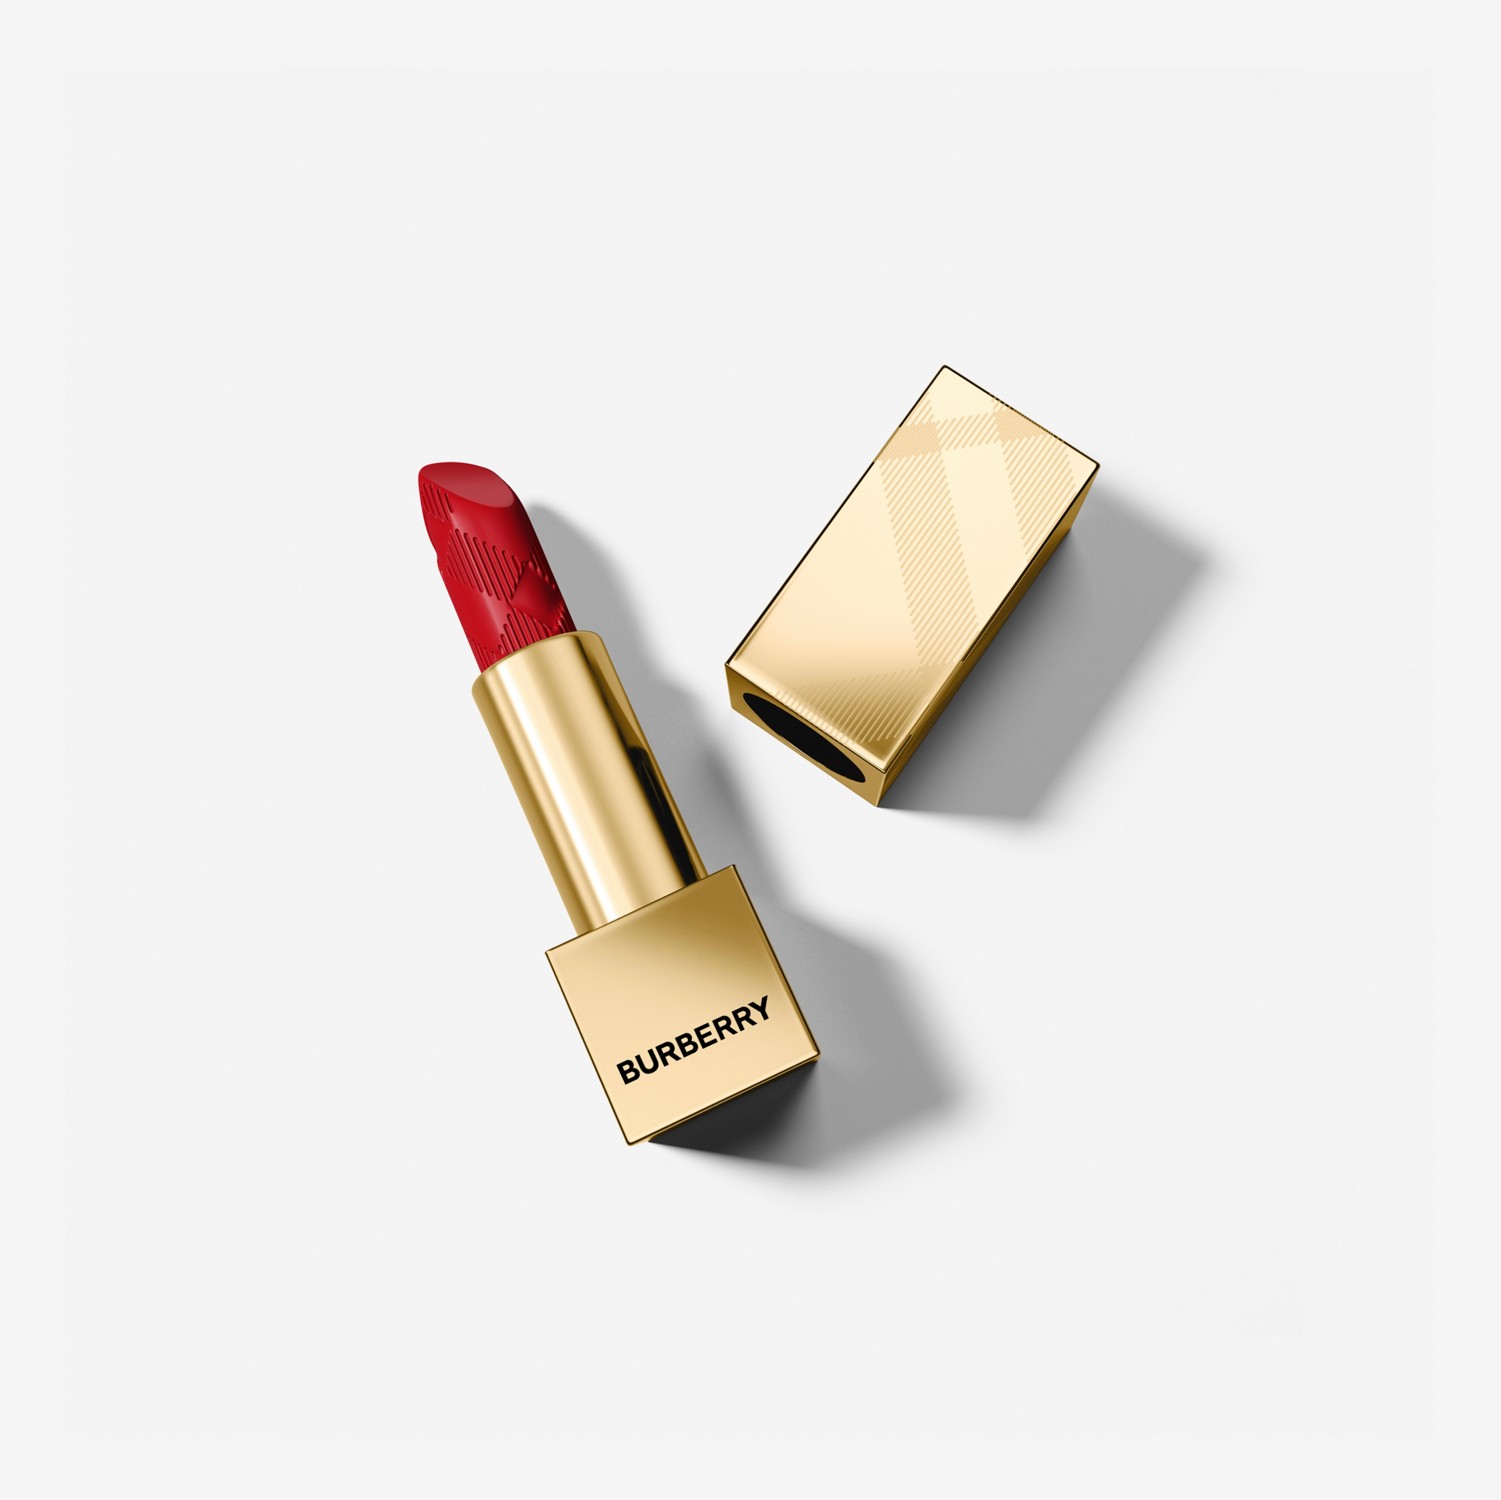 Burberry Kisses Matte – Military Red No.109